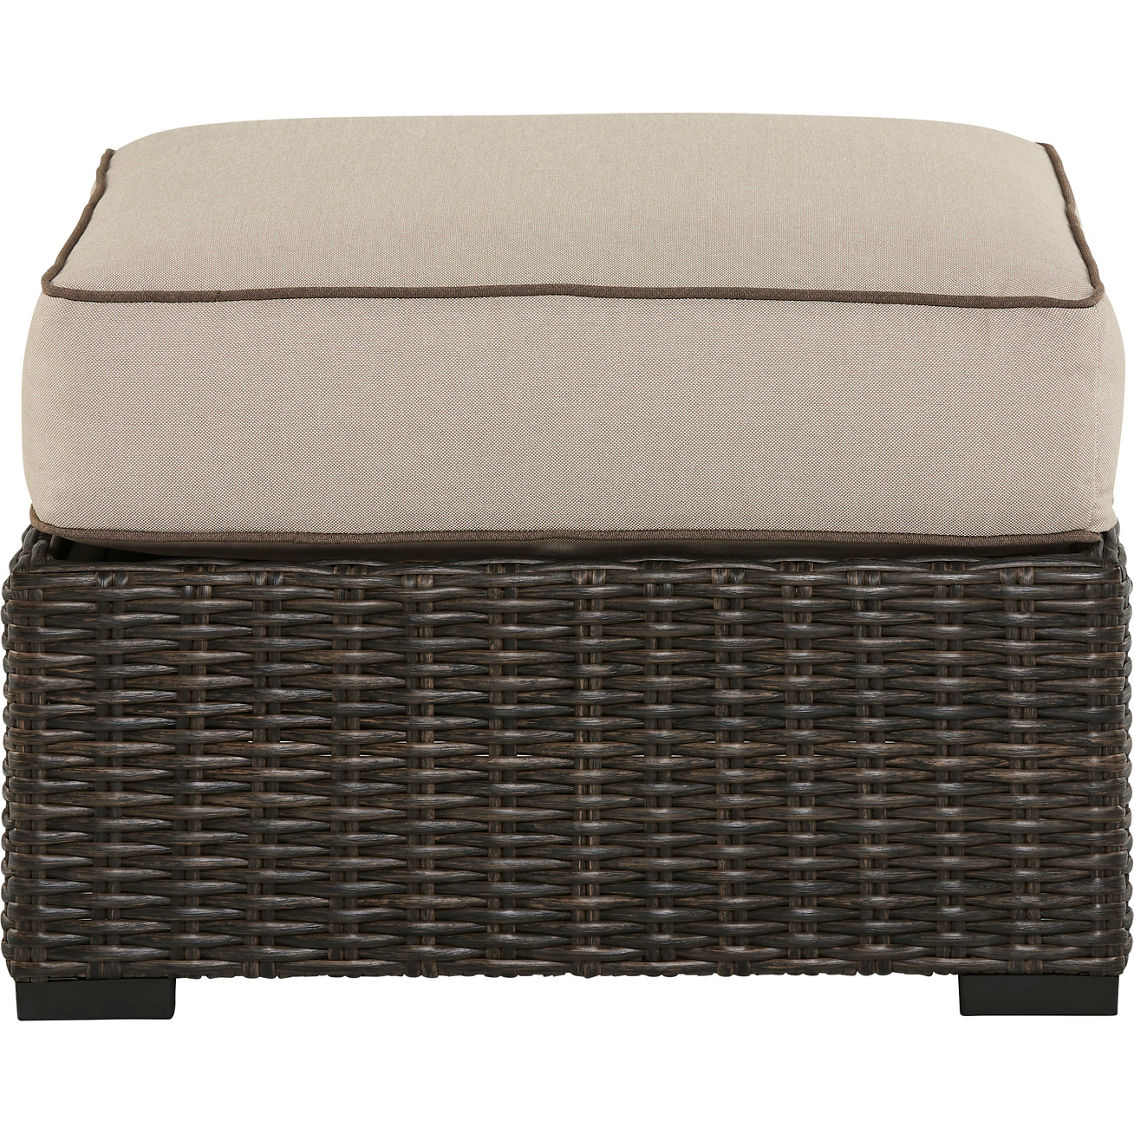 Signature Design by Ashley Coastline Bay Outdoor Ottoman with Cushion - Image 2 of 4